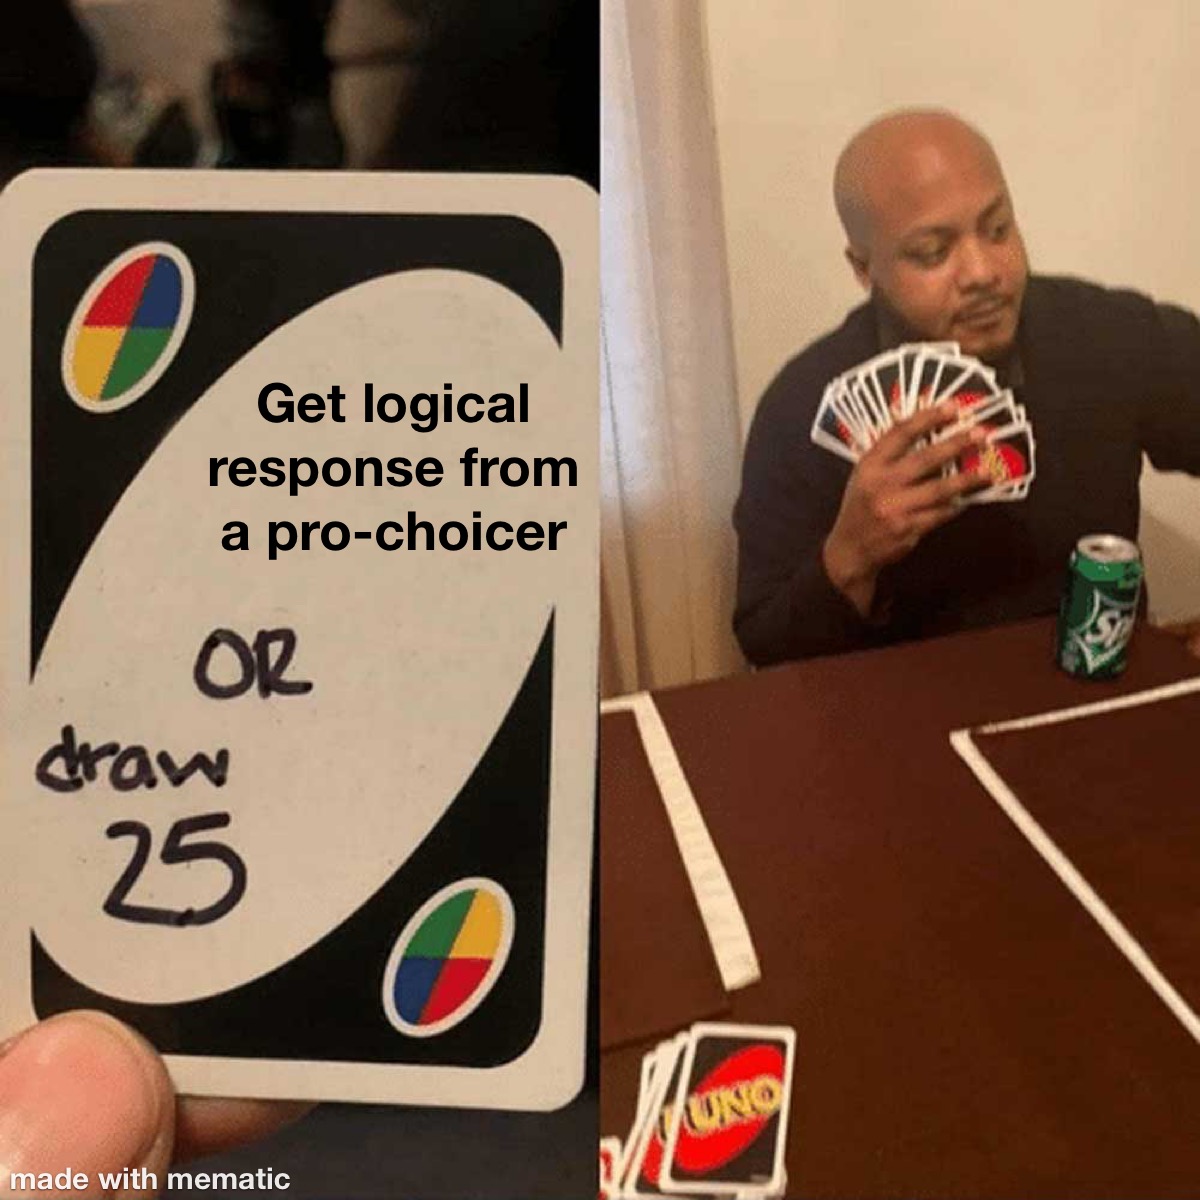 UNO Meme: Get A Logical Response From A Pro-Choicer Or Draw 25